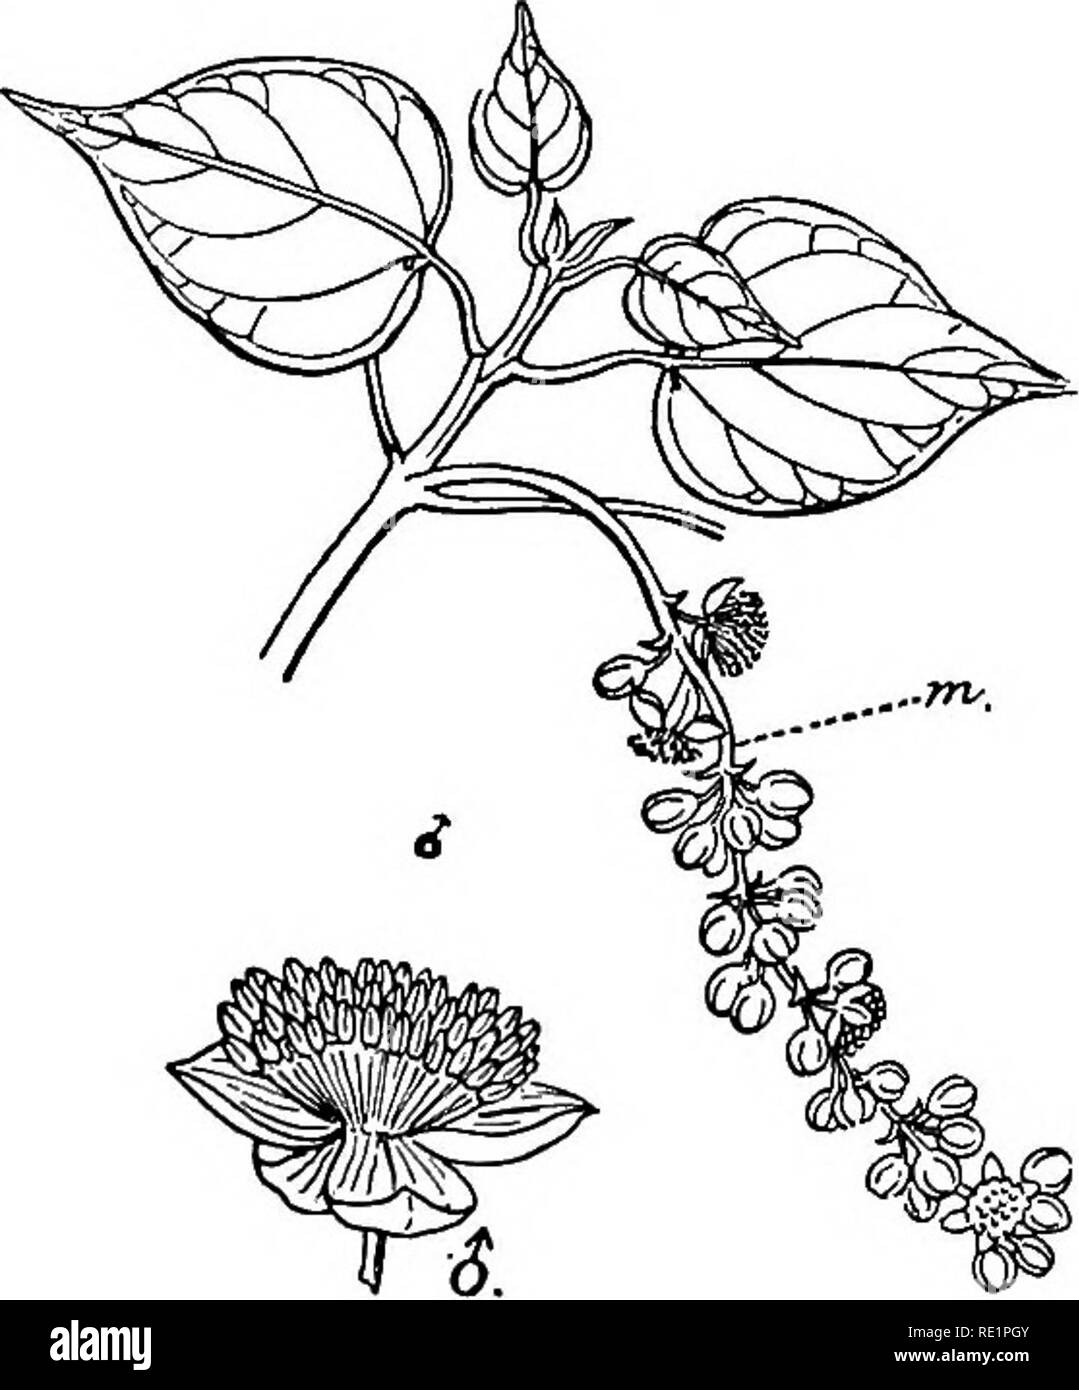 . A manual of Indian botany. Botany. 266 CLASSIFICATION thus are common roadside weeds (fig. 235); pituli {Trewia nudiflora) (figs. 236, 237), a deciduous tree with dioecious pollen-flowers; bichuti or jal-bichuti {Tragm involucrata), a perennial small twining herb with stems, leaves, and fruits full of stinging bristles, used by village schoolmasters as an instrument of casti- gating truant boys; akrote or Walnut {Aleurites â moluccana) â not the EnglishWalnutâa tree pretty common in gar- dens about Calcutta, originally a Malayan plant; Cassava or. Please note that these images are extracted  Stock Photo